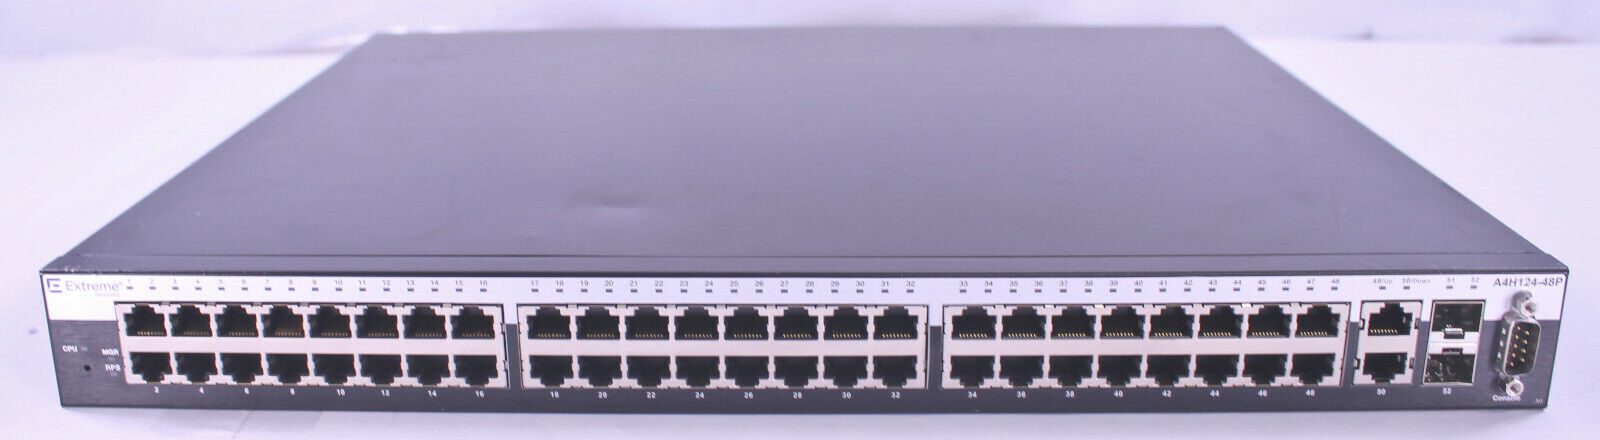 Enterasys SecureStack A4 10/100 PoE Managed Switch A4H124-48P